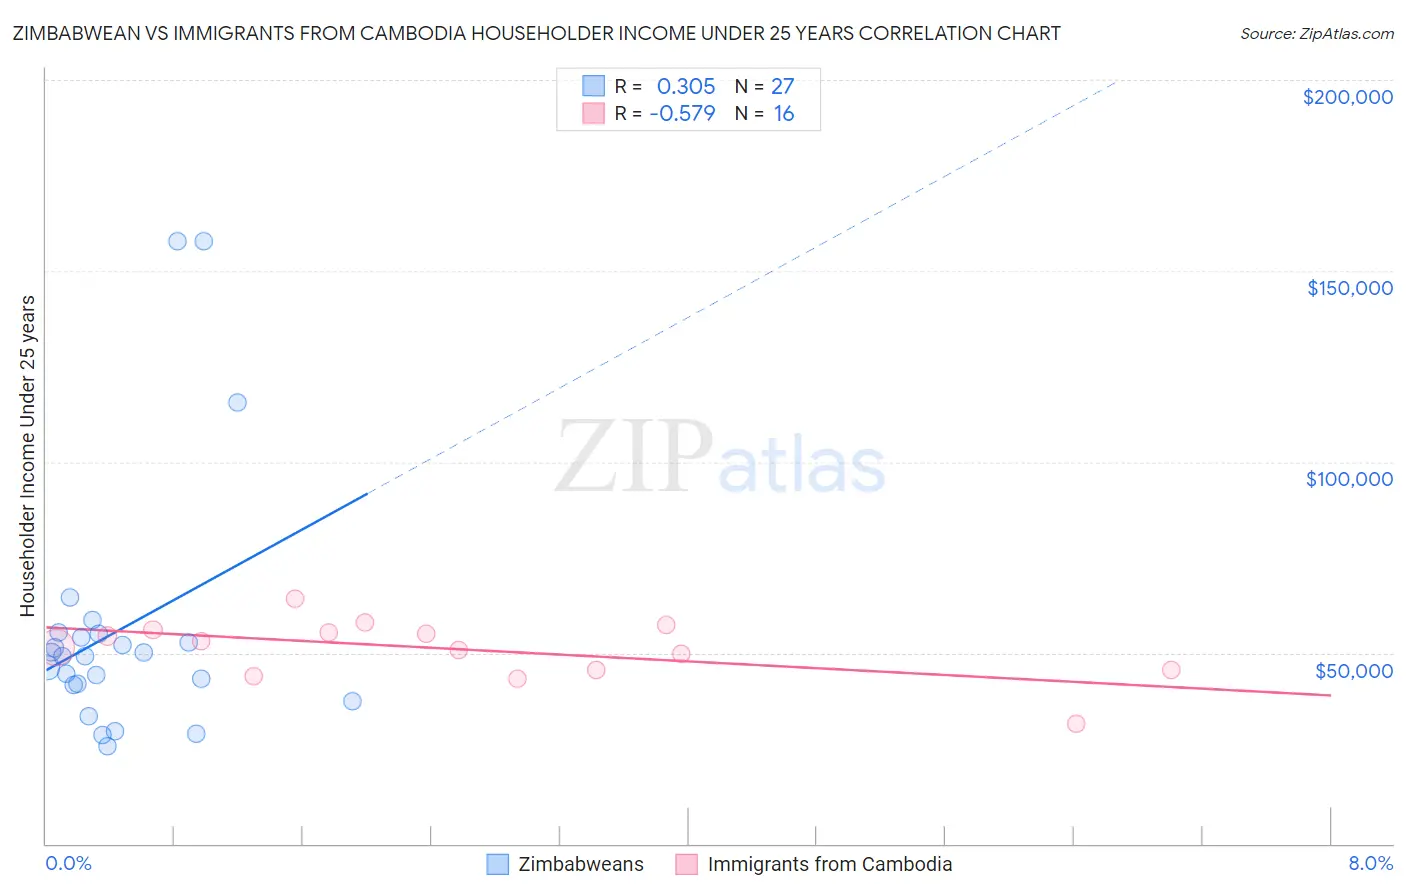 Zimbabwean vs Immigrants from Cambodia Householder Income Under 25 years